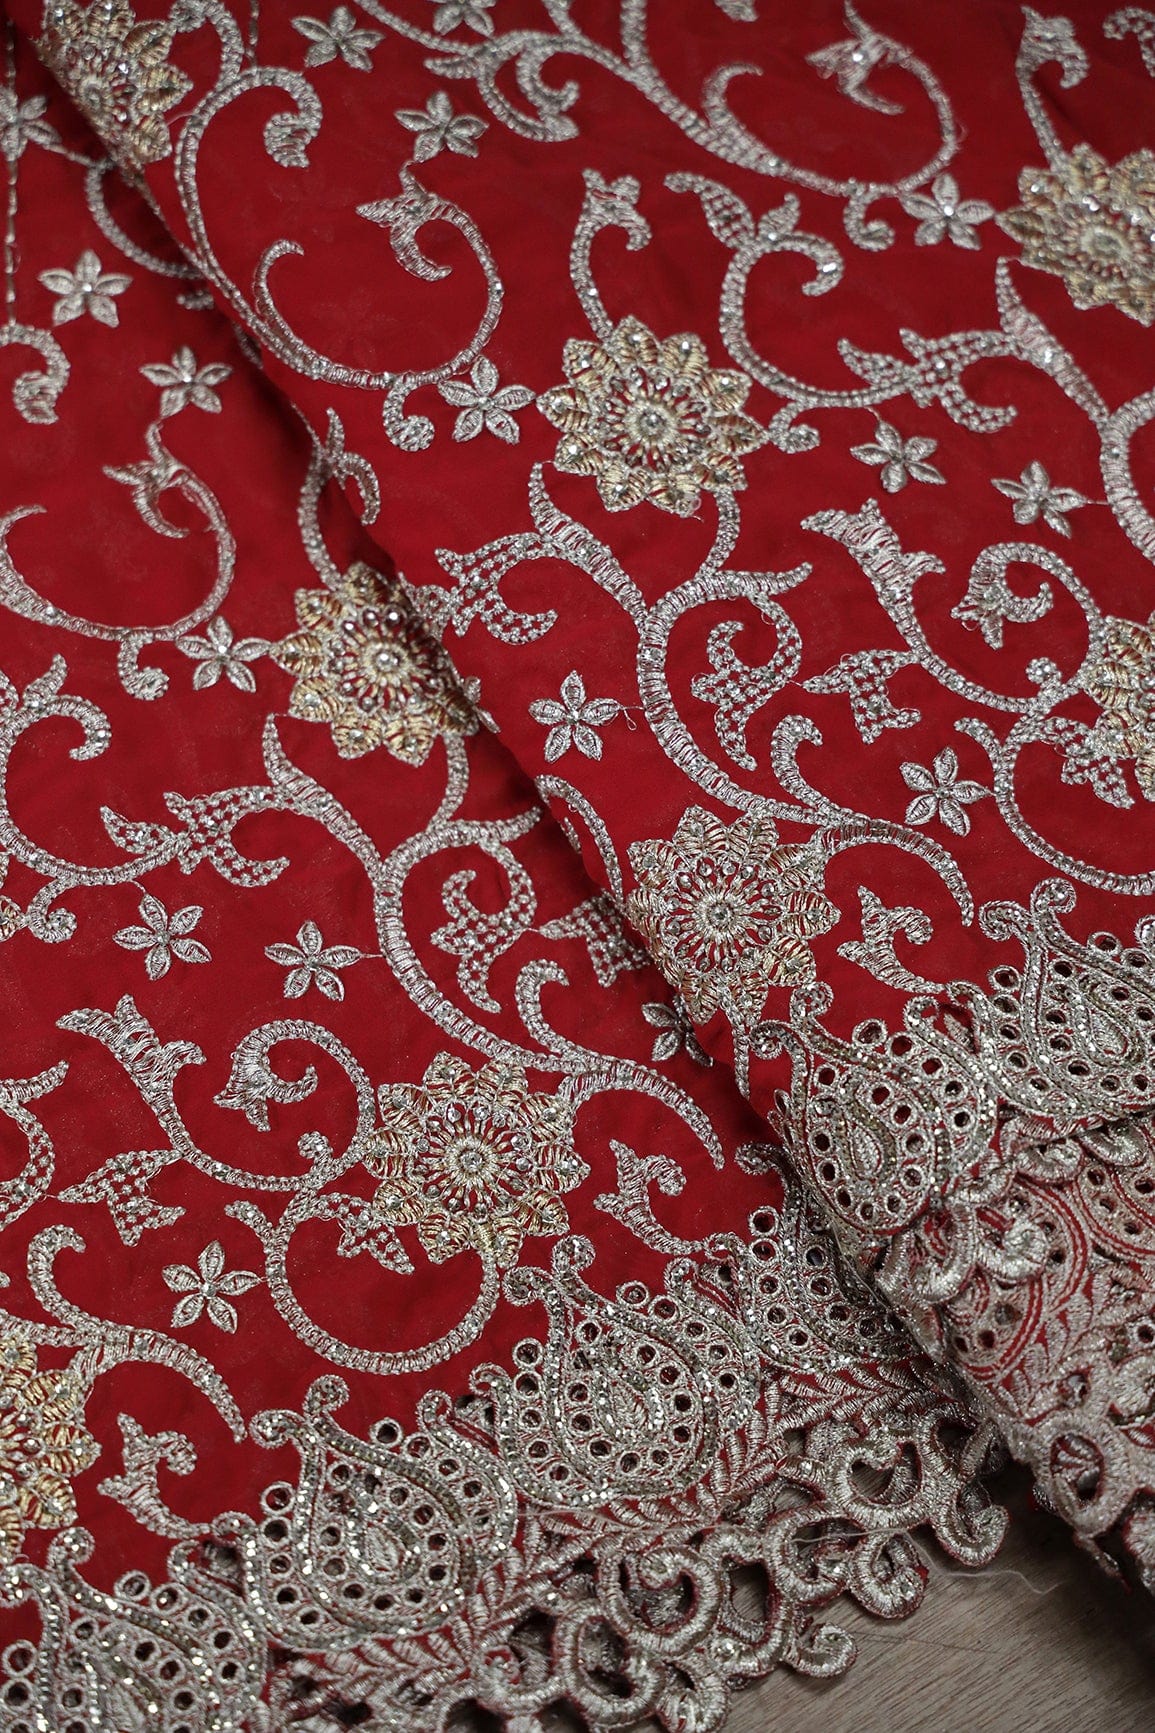 doeraa Embroidery Fabrics Big Width''56'' Gold And Silver Zari Floral Embroidery Work On Red Georgette Fabric With Border